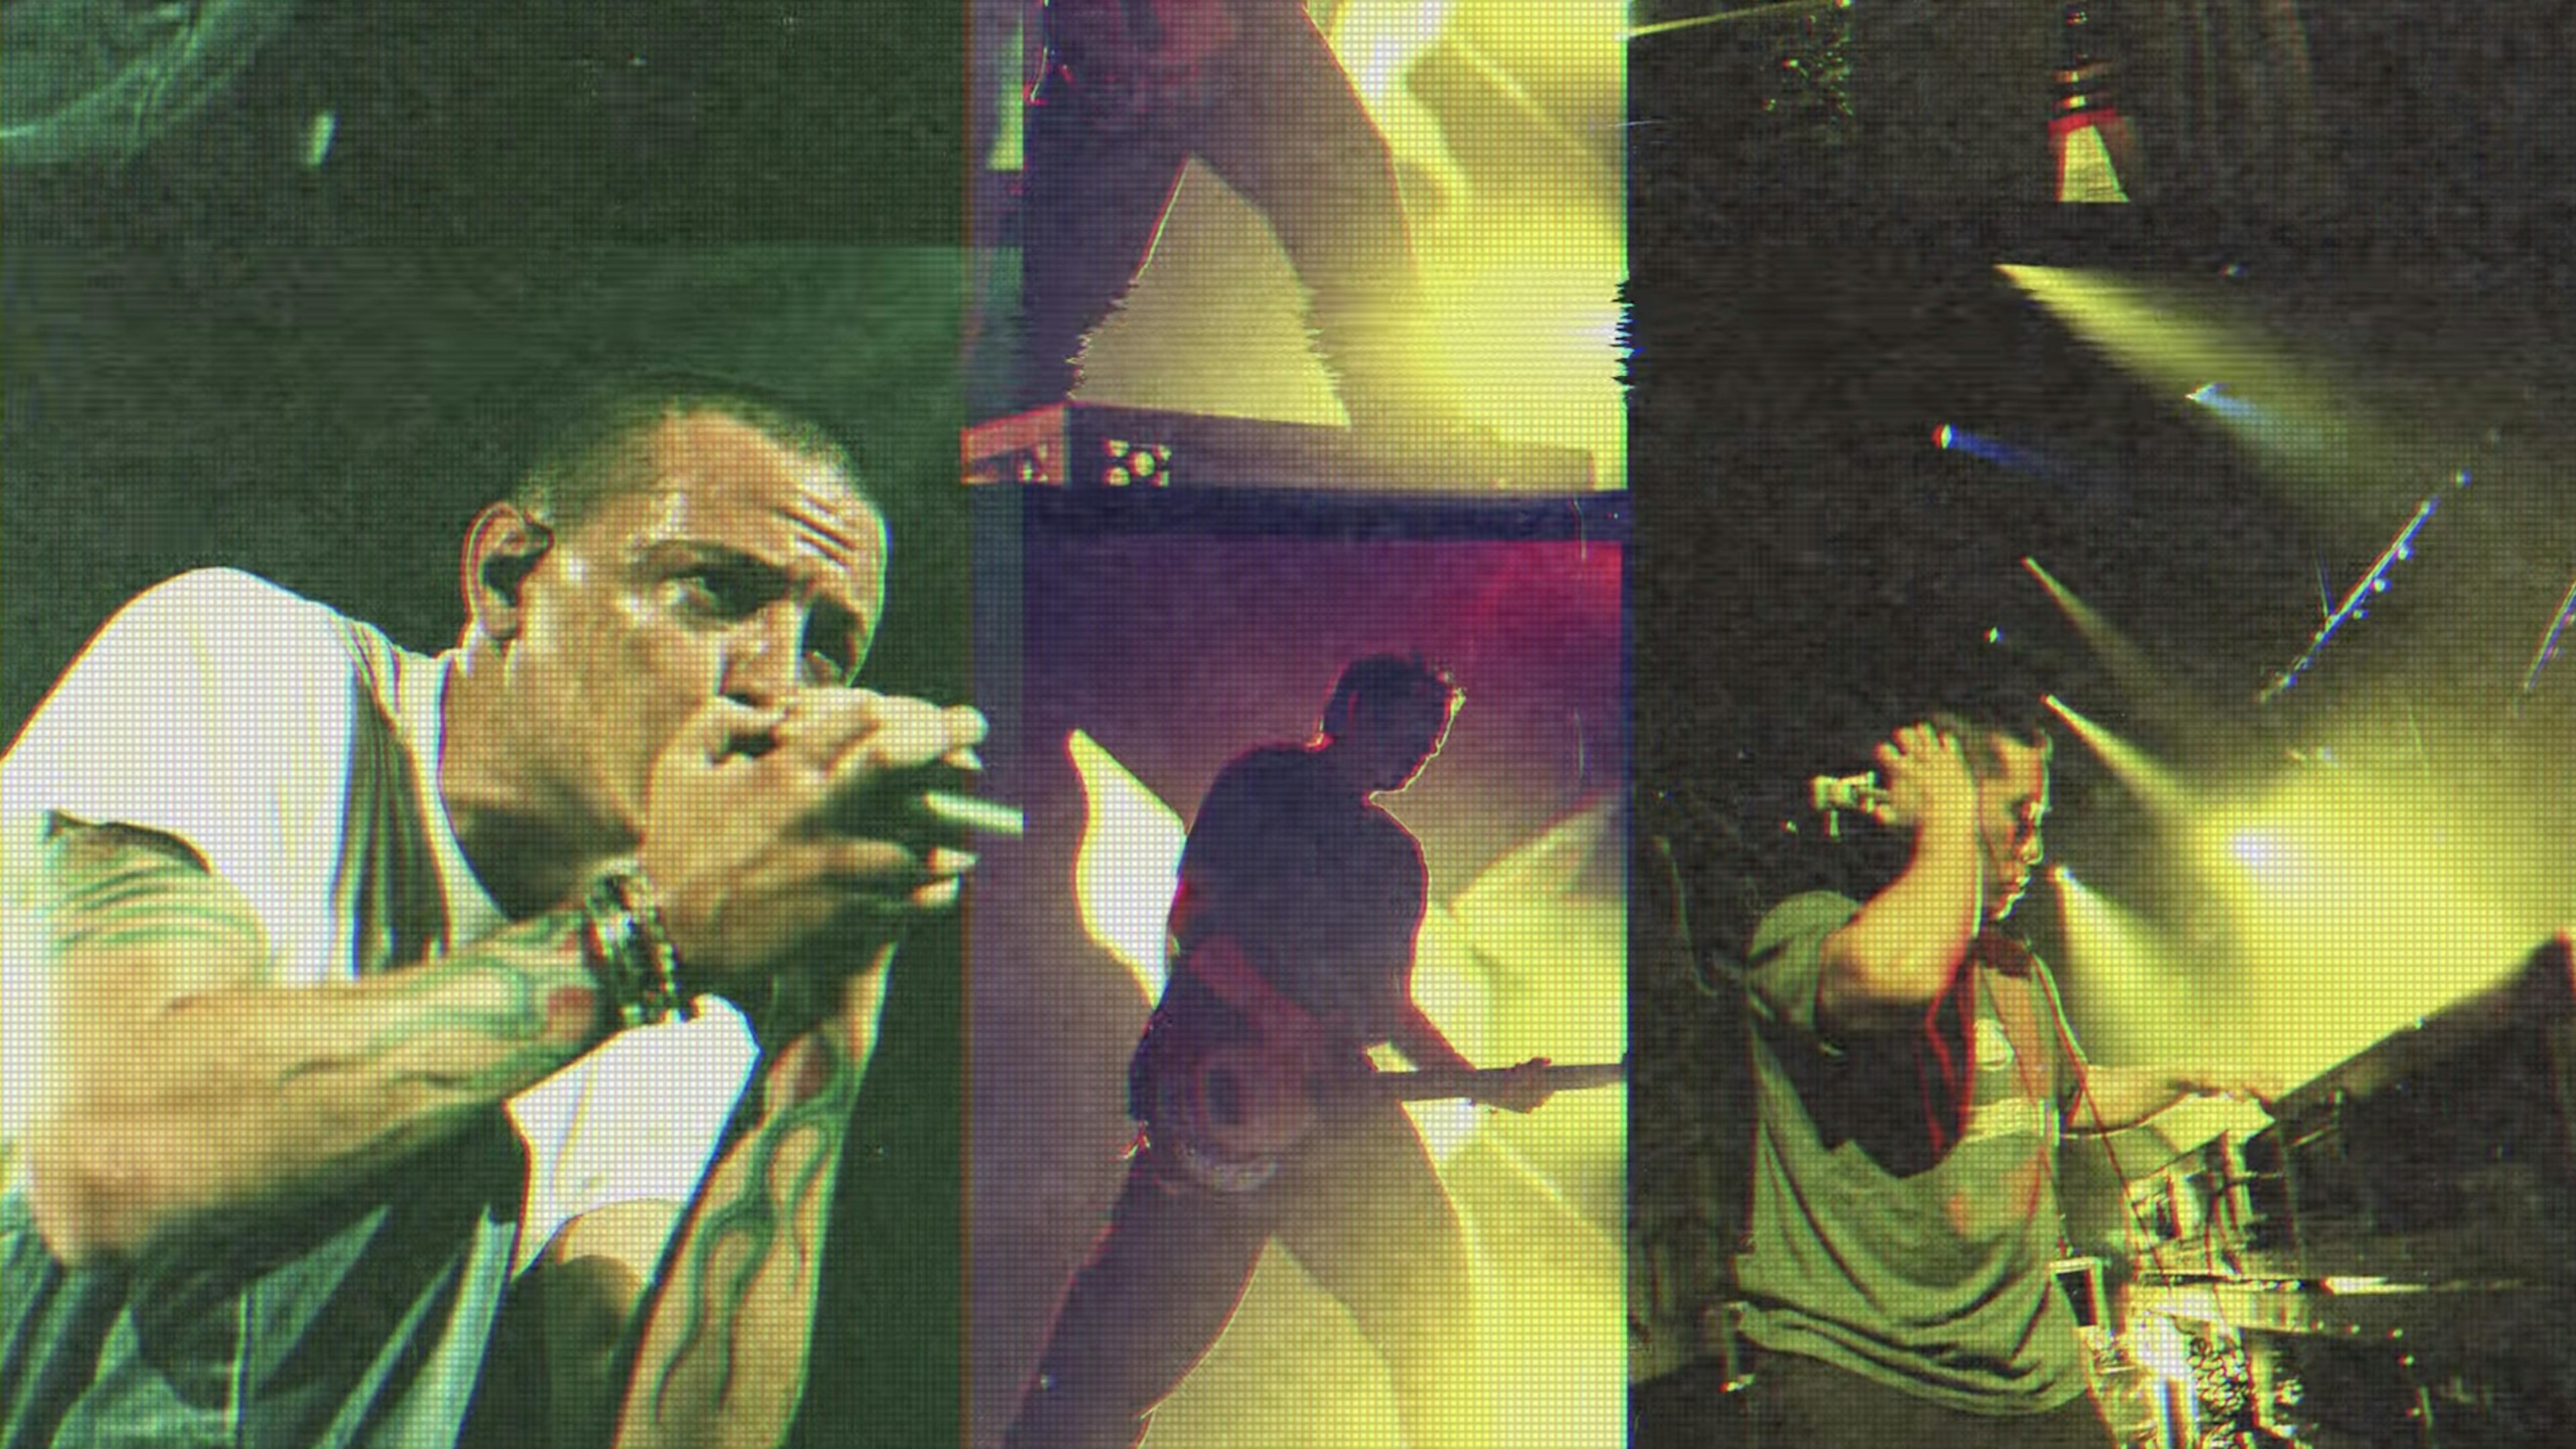 Linkin park demo. Linkin Park. Linkin Park 2001. Линкин парк in the end. Linkin Park Live 2001.